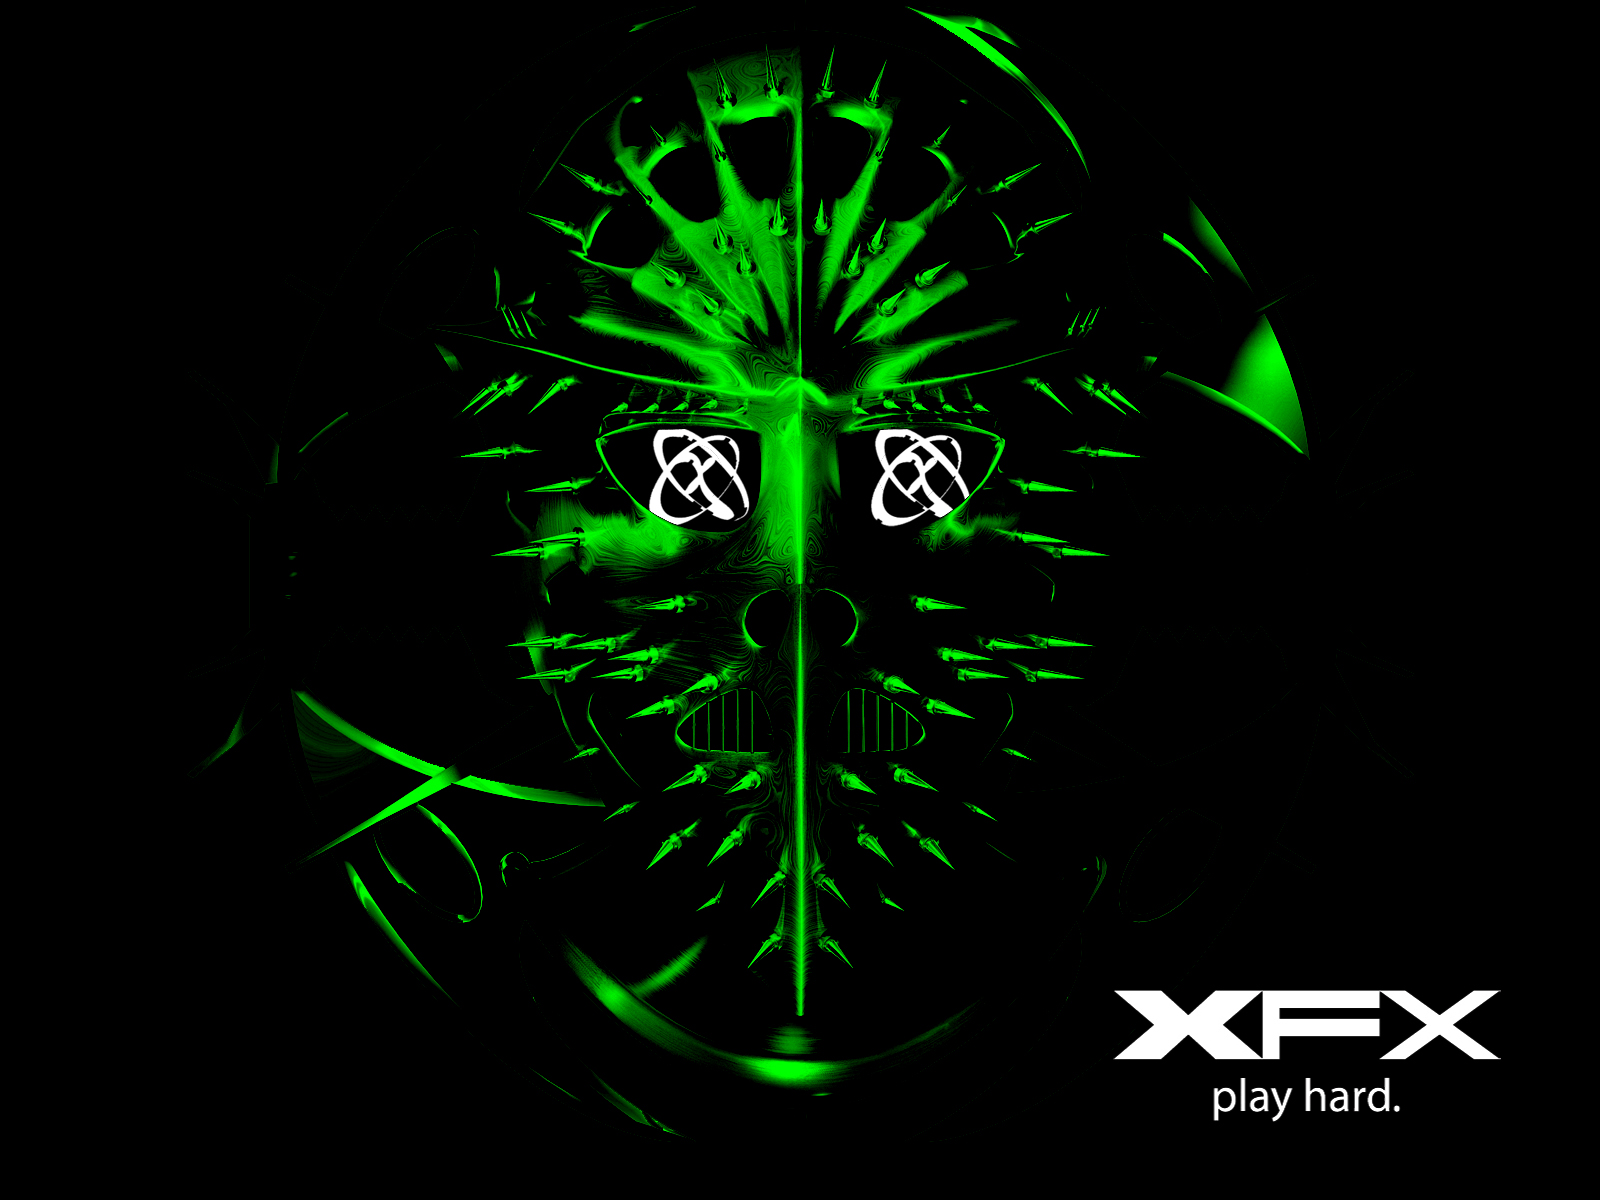 My Xfx Wallpaper Submissions